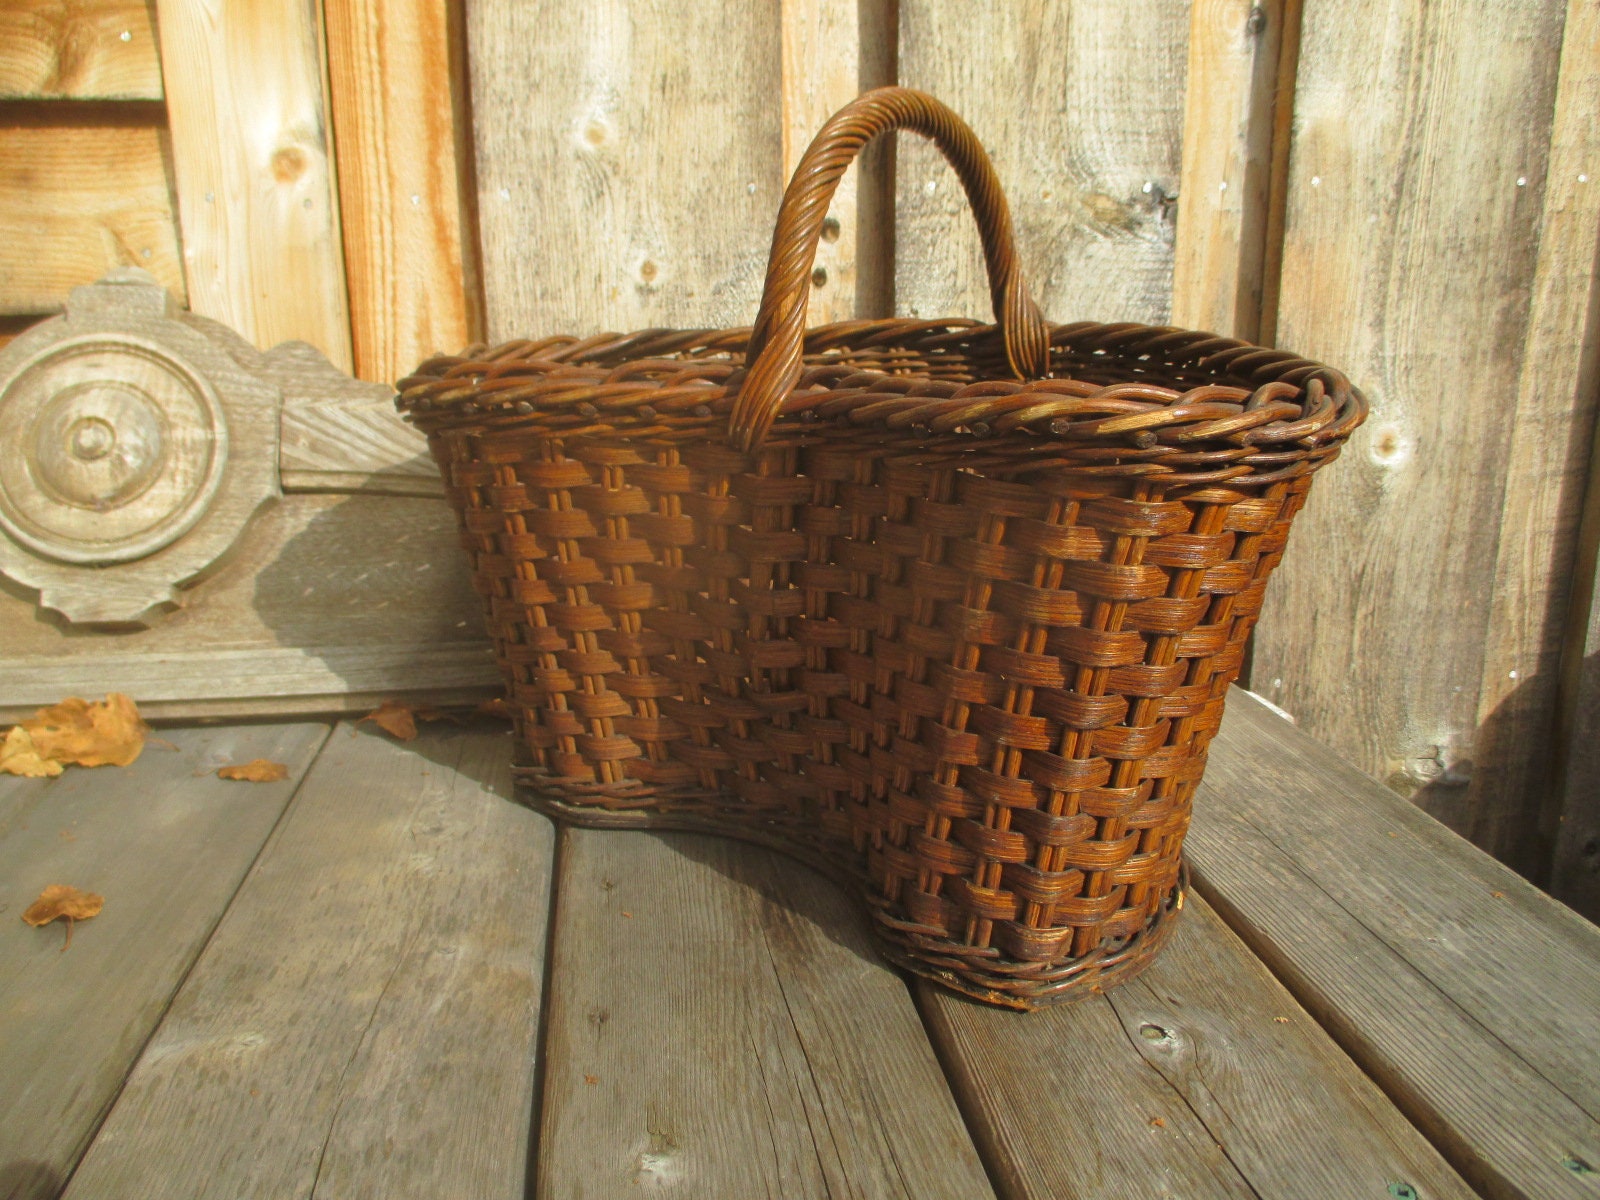 Vintage Woven Wicker Fishing Creels / Baskets - Leather Straps. 2 Items -  Bunting Online Auctions